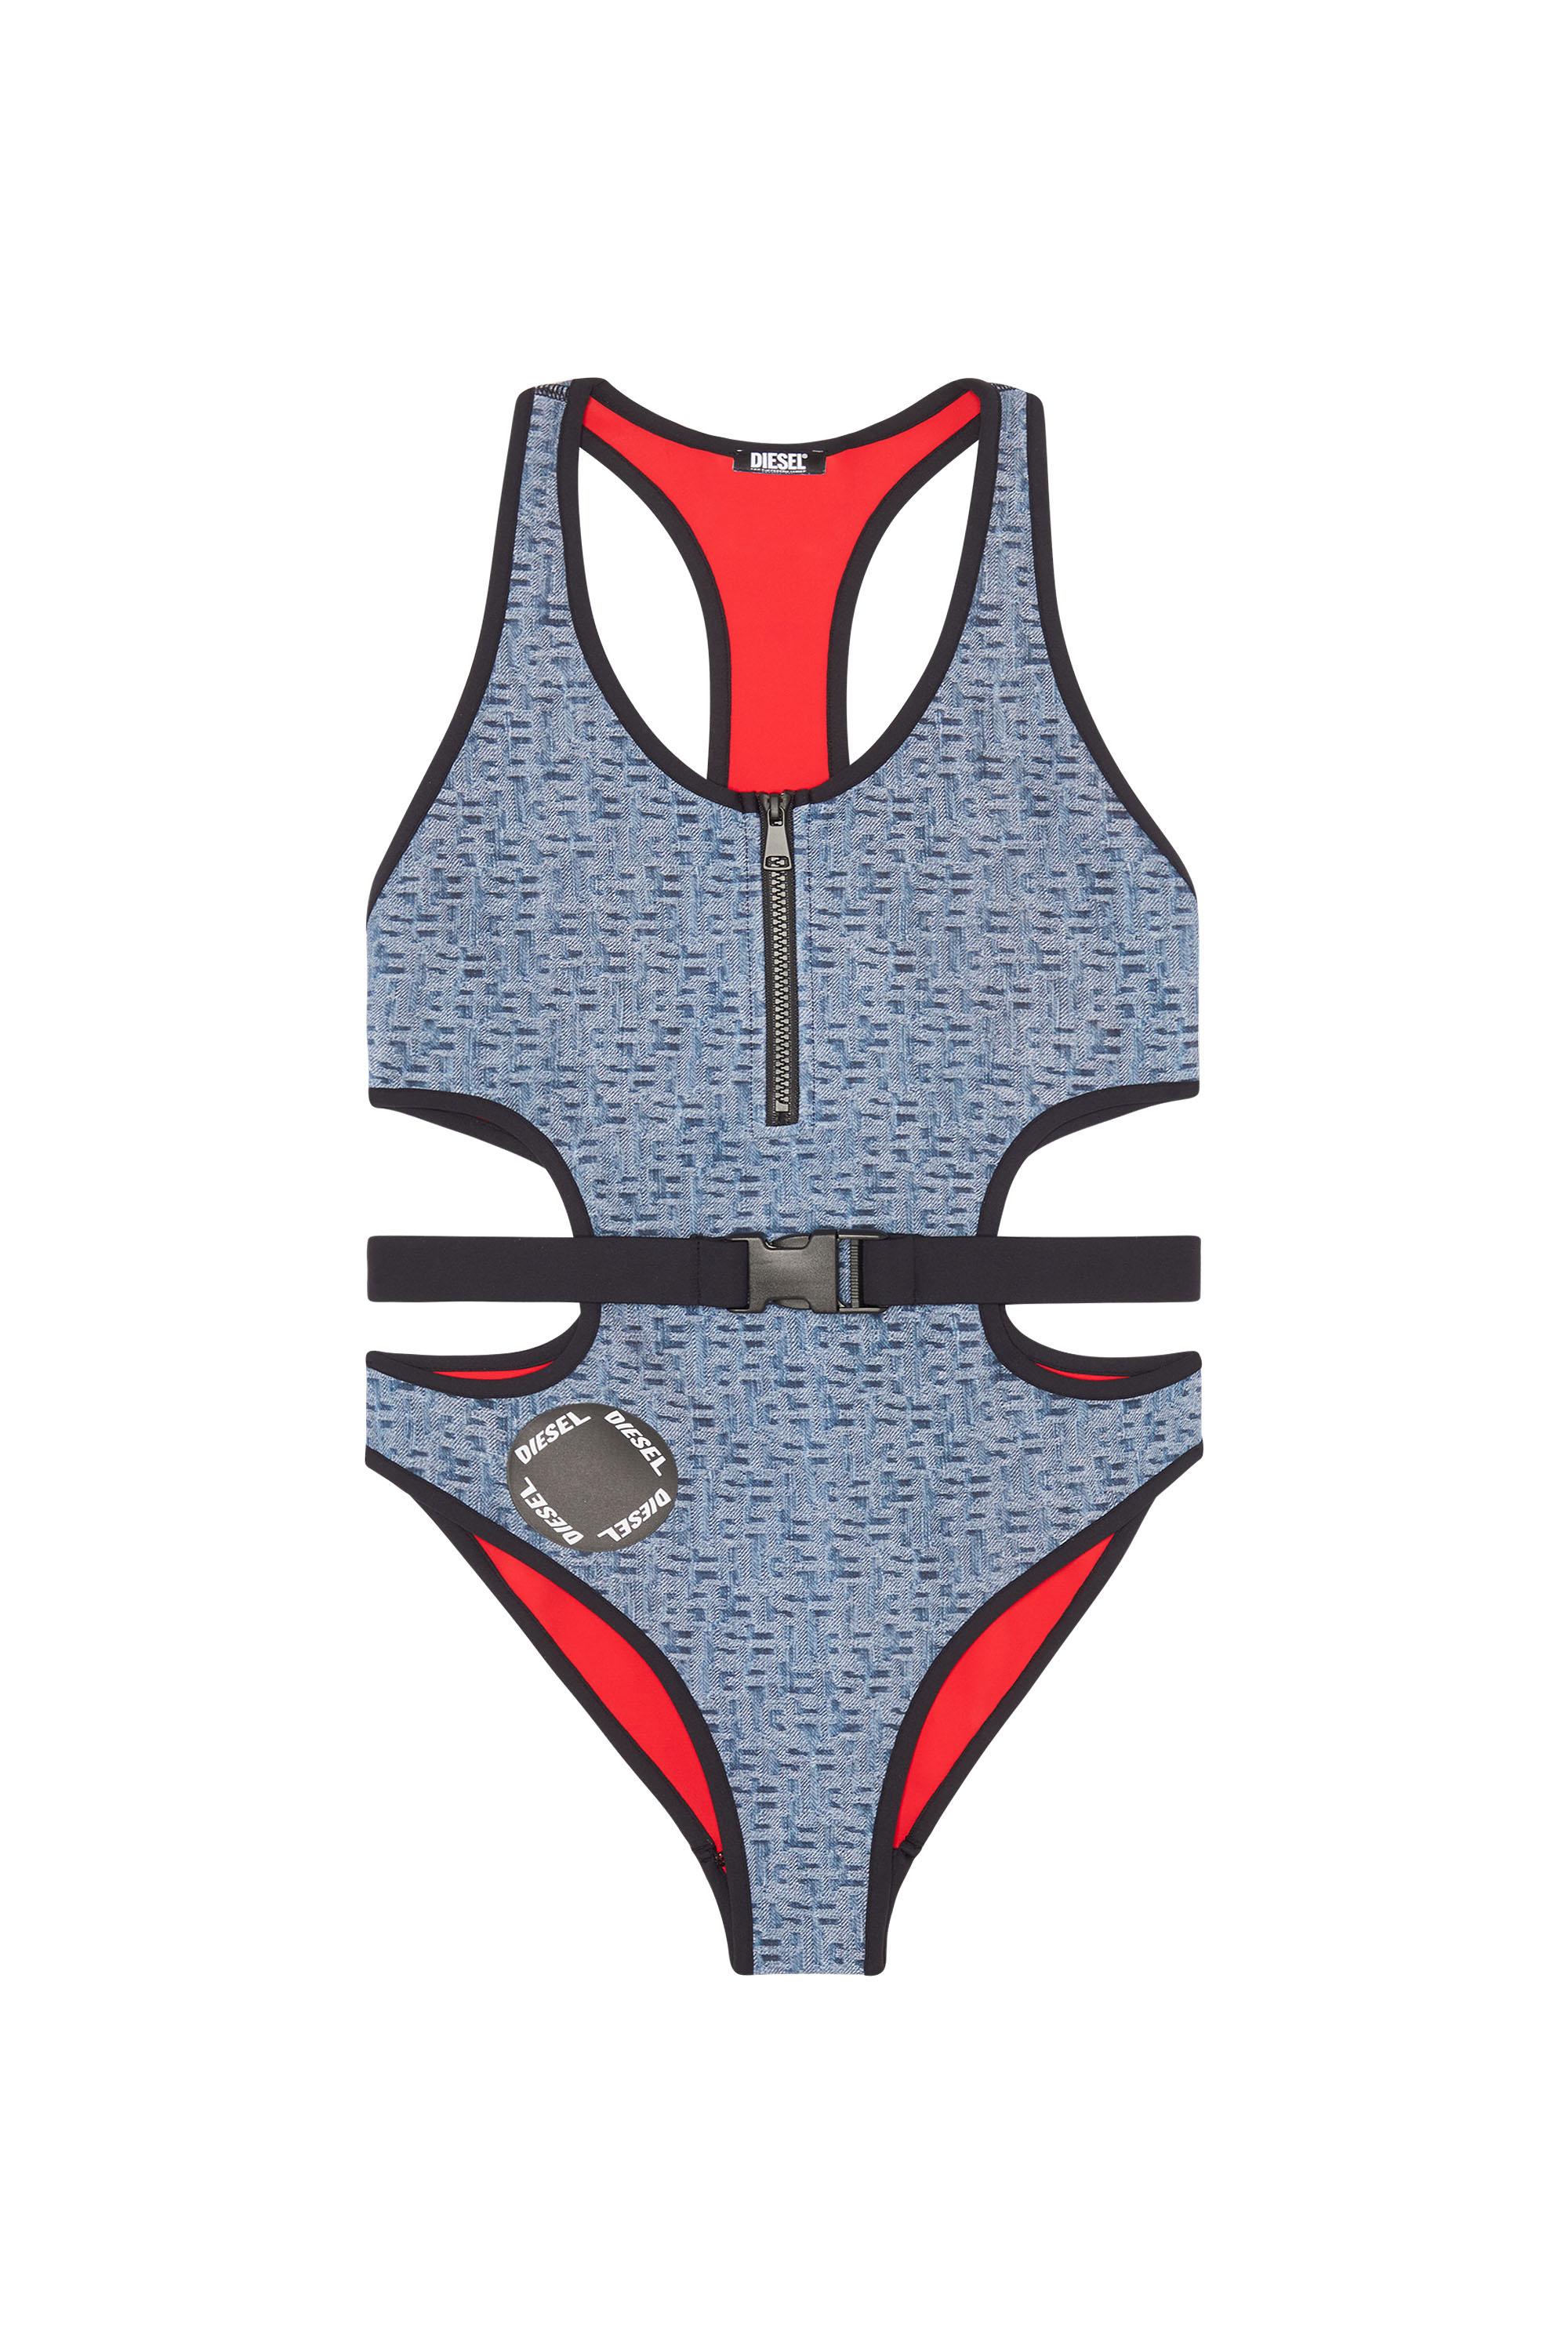 DIESEL Cut-out Swimsuit With Monogram Print in Blue | Lyst